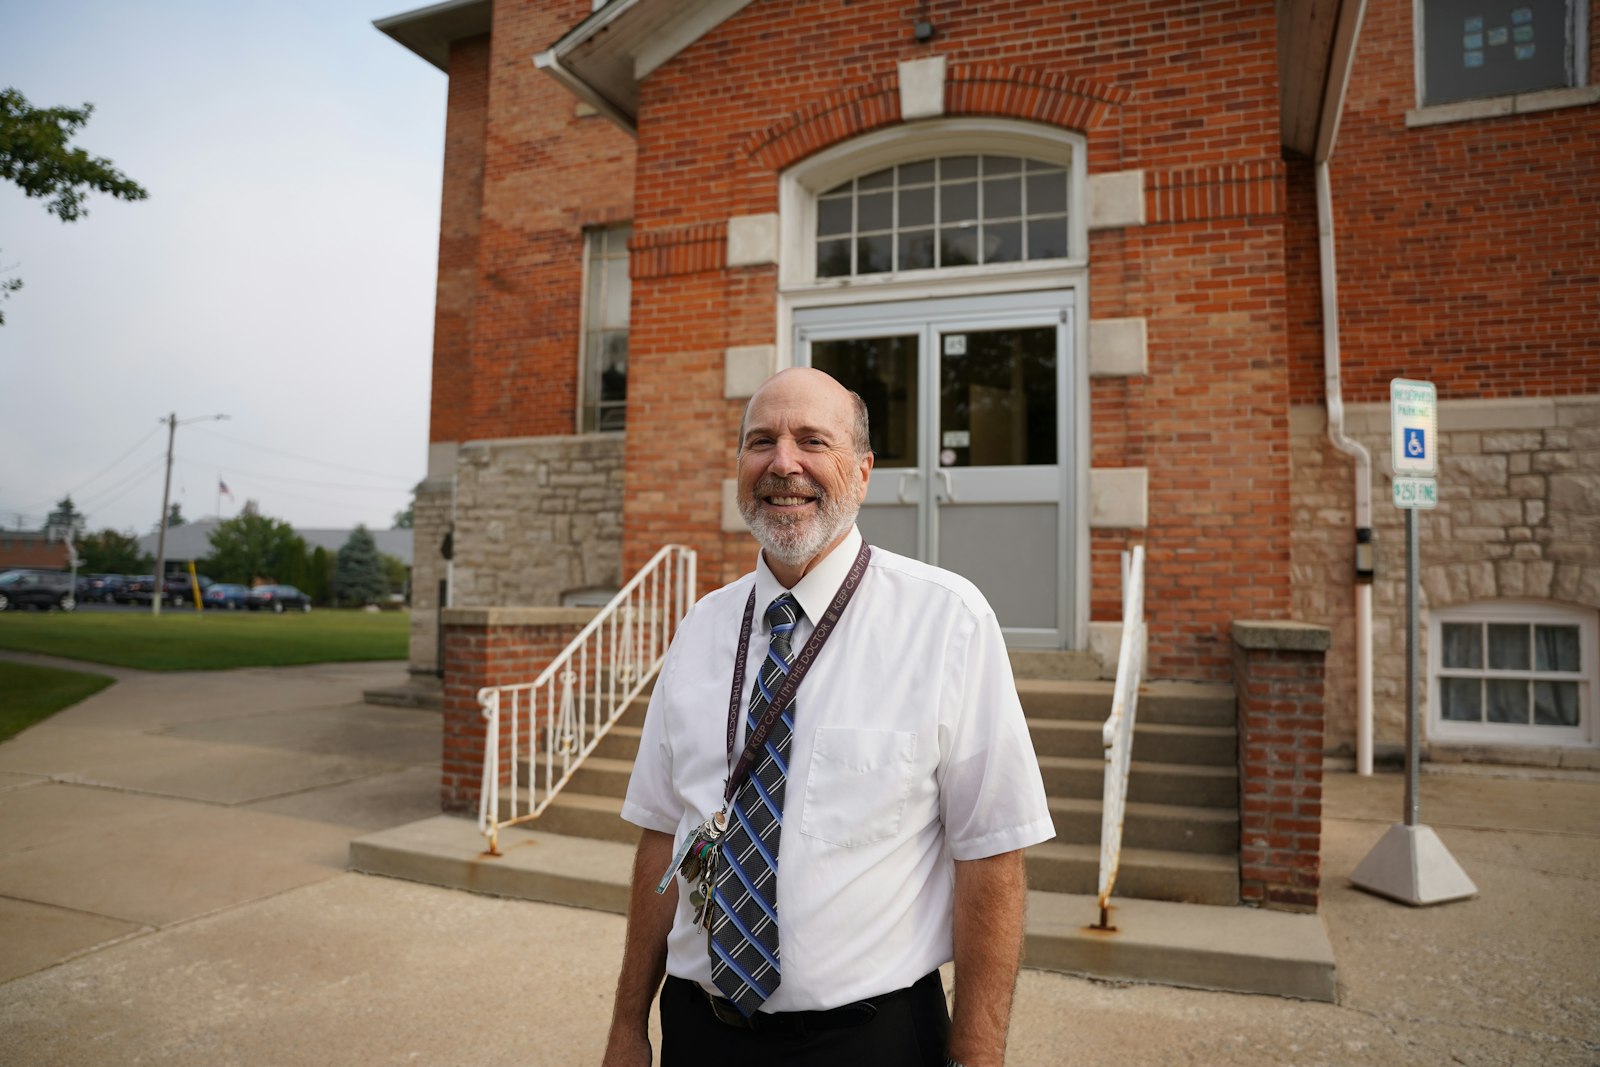 Carl Lenze, principal of St. Patrick School in Carleton, said he's consistently amazed at the dedication and support of the small rural town of Carleton, where even parents whose children no longer attend St. Patrick step up to volunteer and support the school's future. (Daniel Meloy | Detroit Catholic)